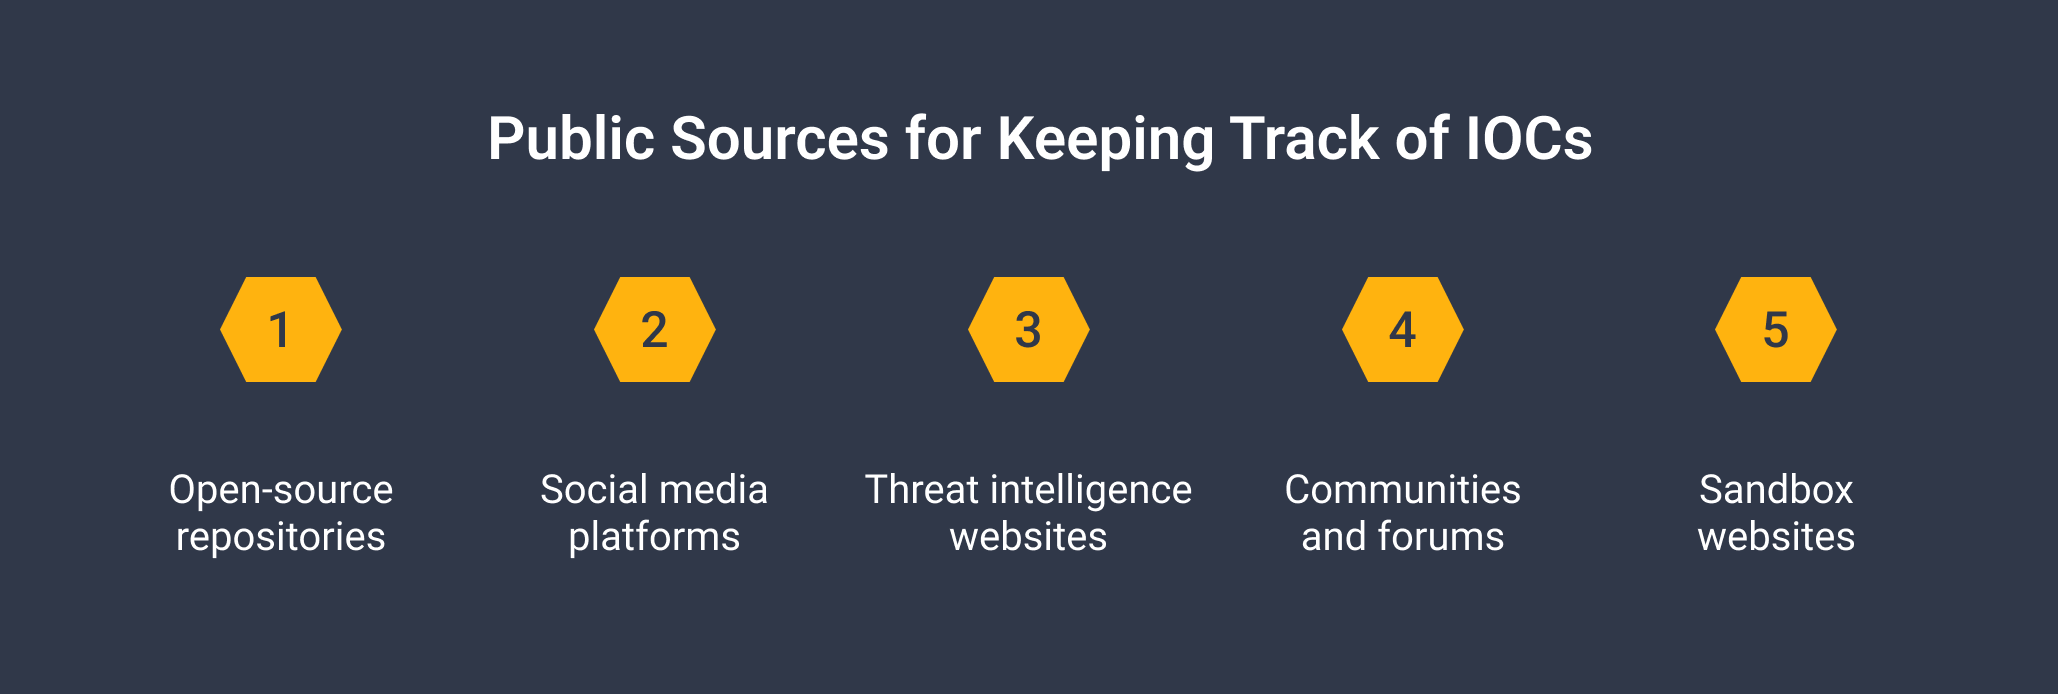 Public Sources for Keeping Track of IOCs